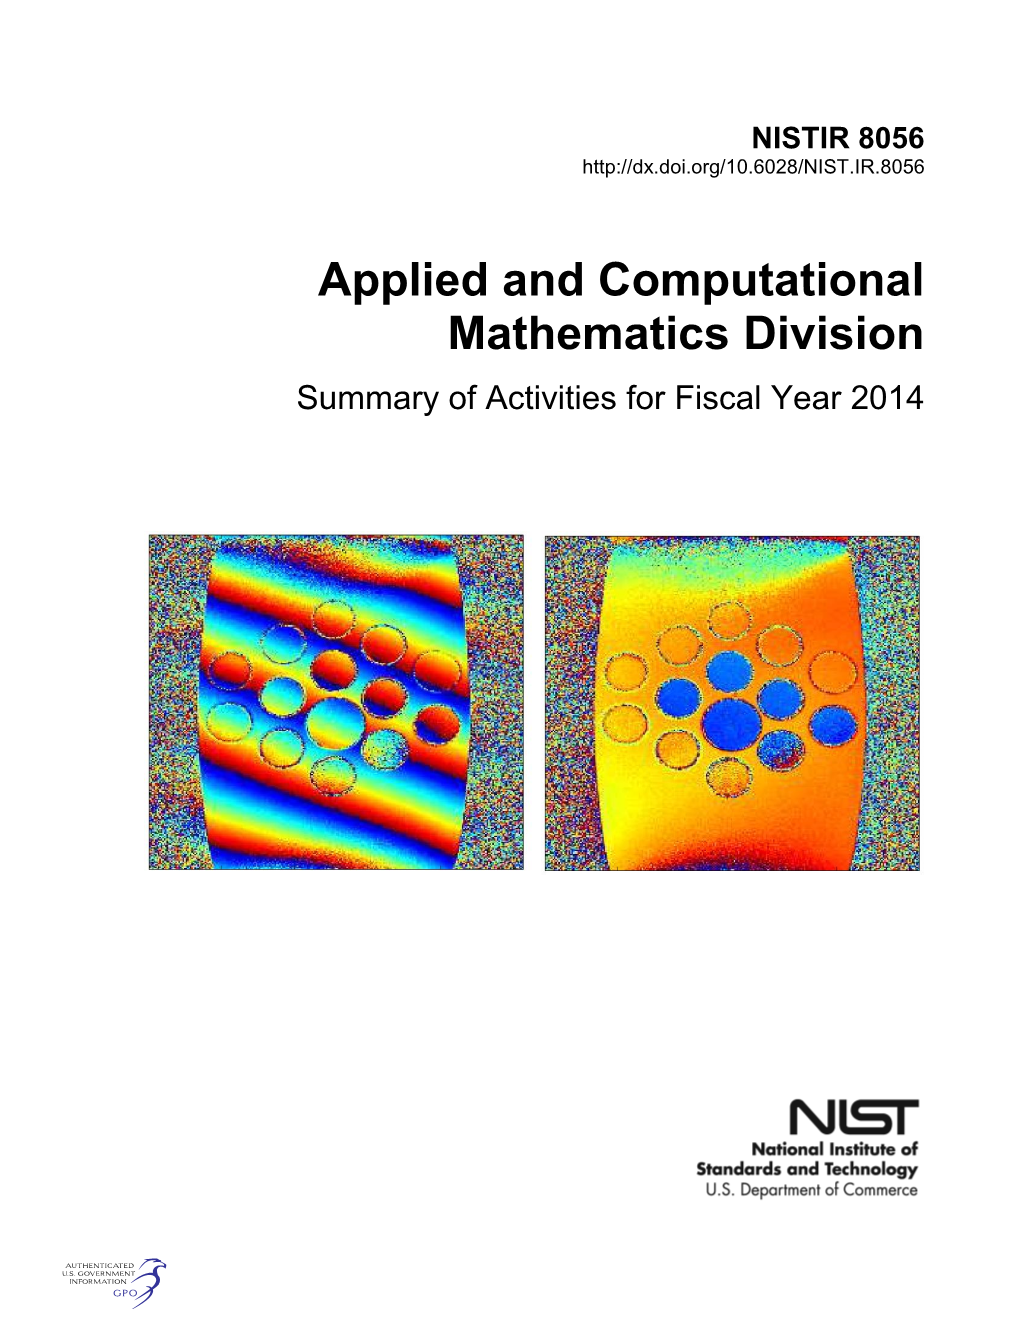 Applied and Computational Mathematics Division